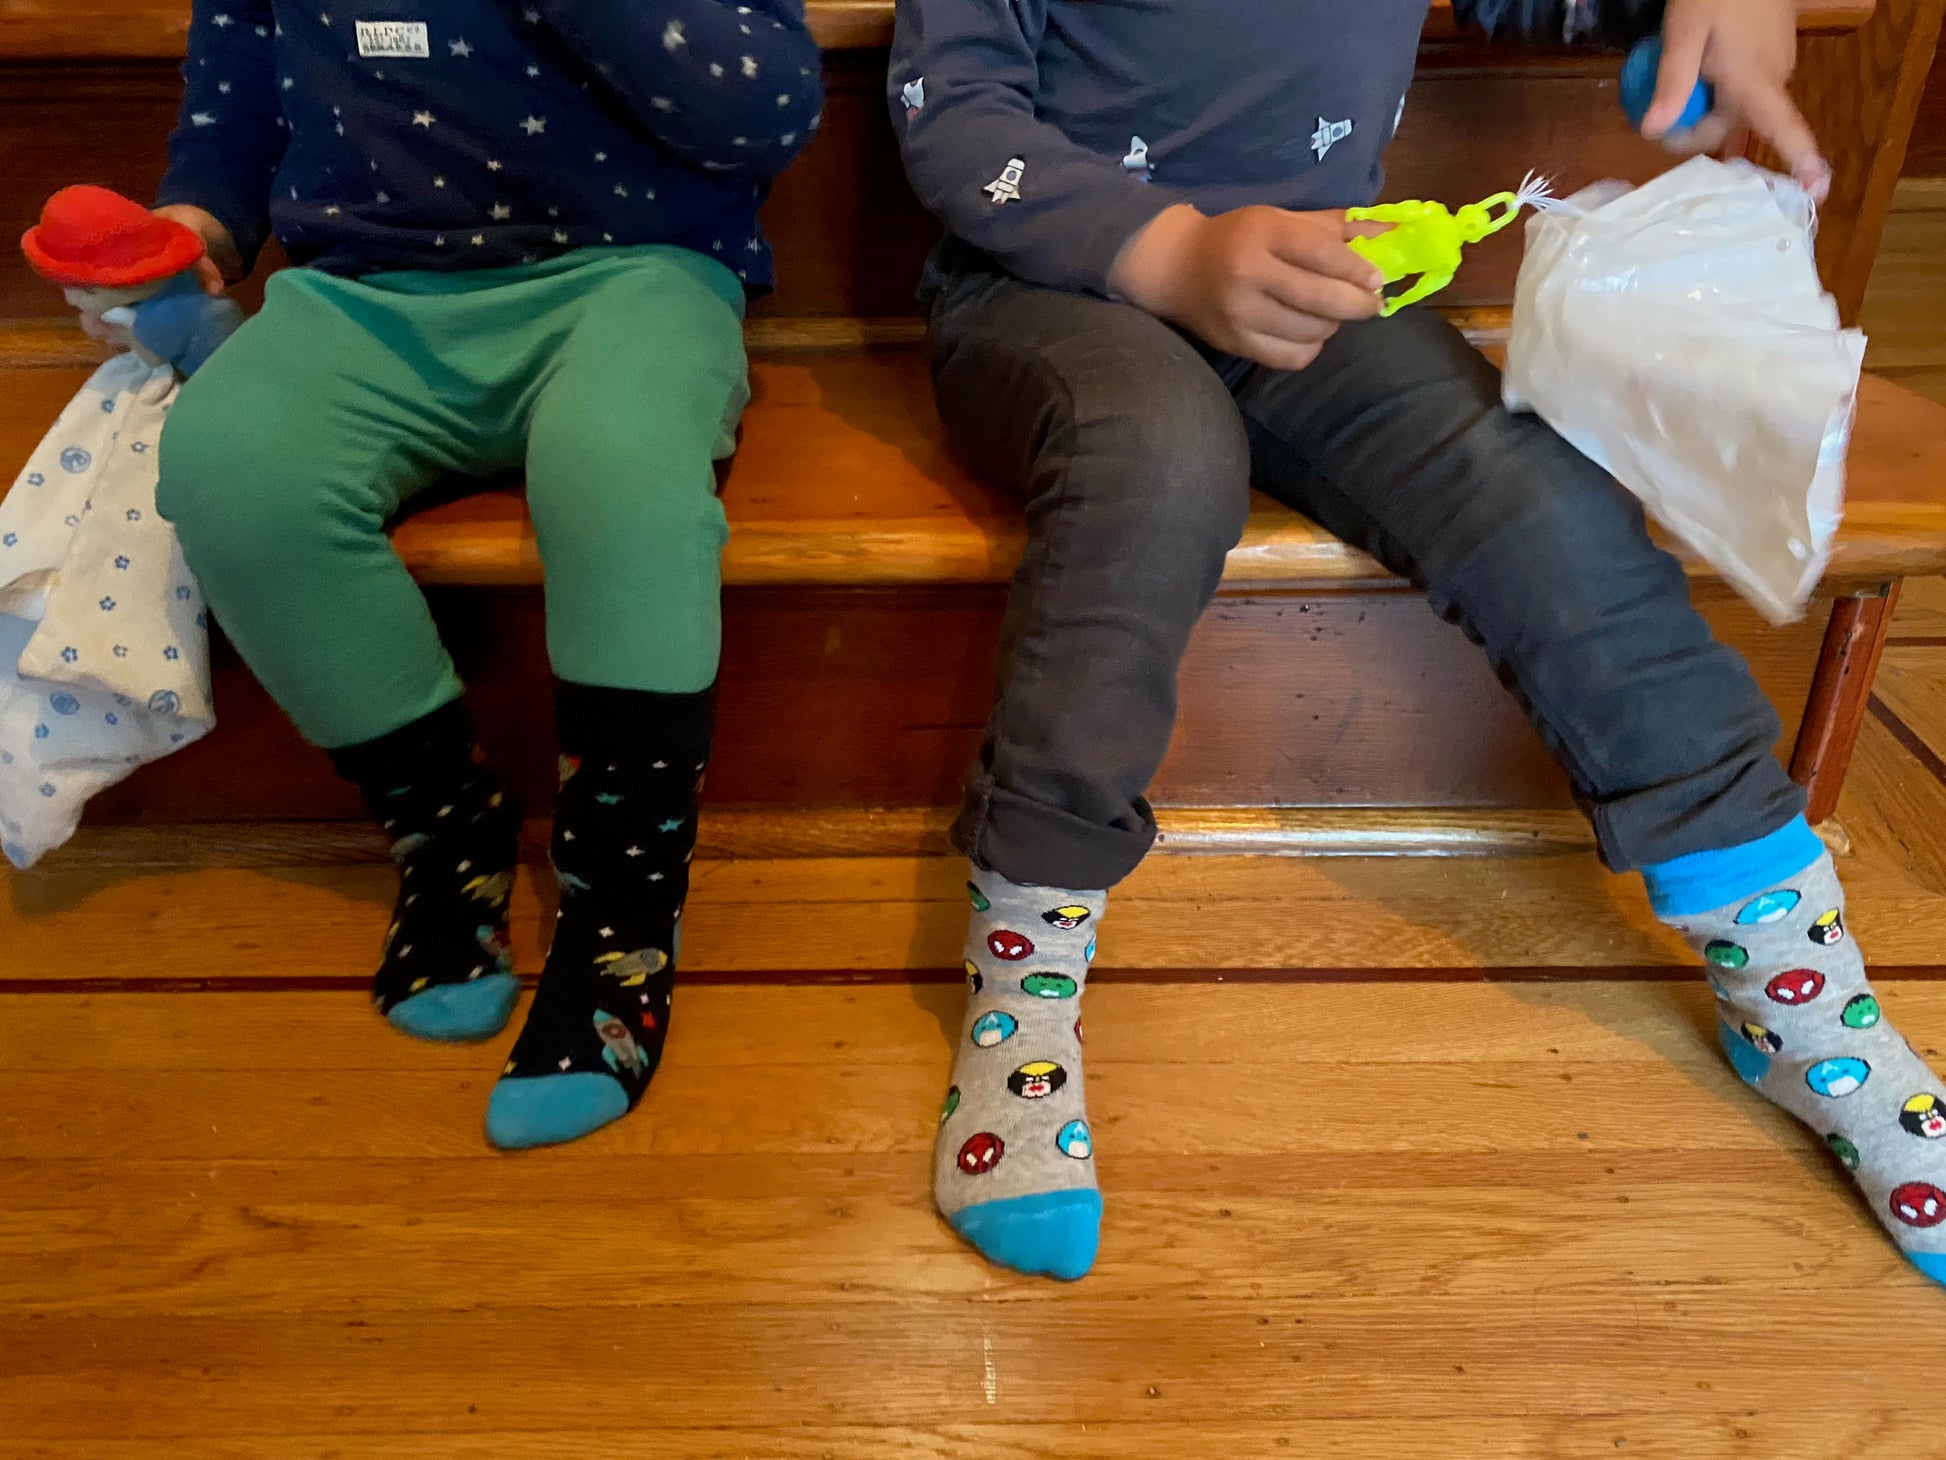 kids socks with space scene. Rockets, Spaceships and stars. made from bamboo